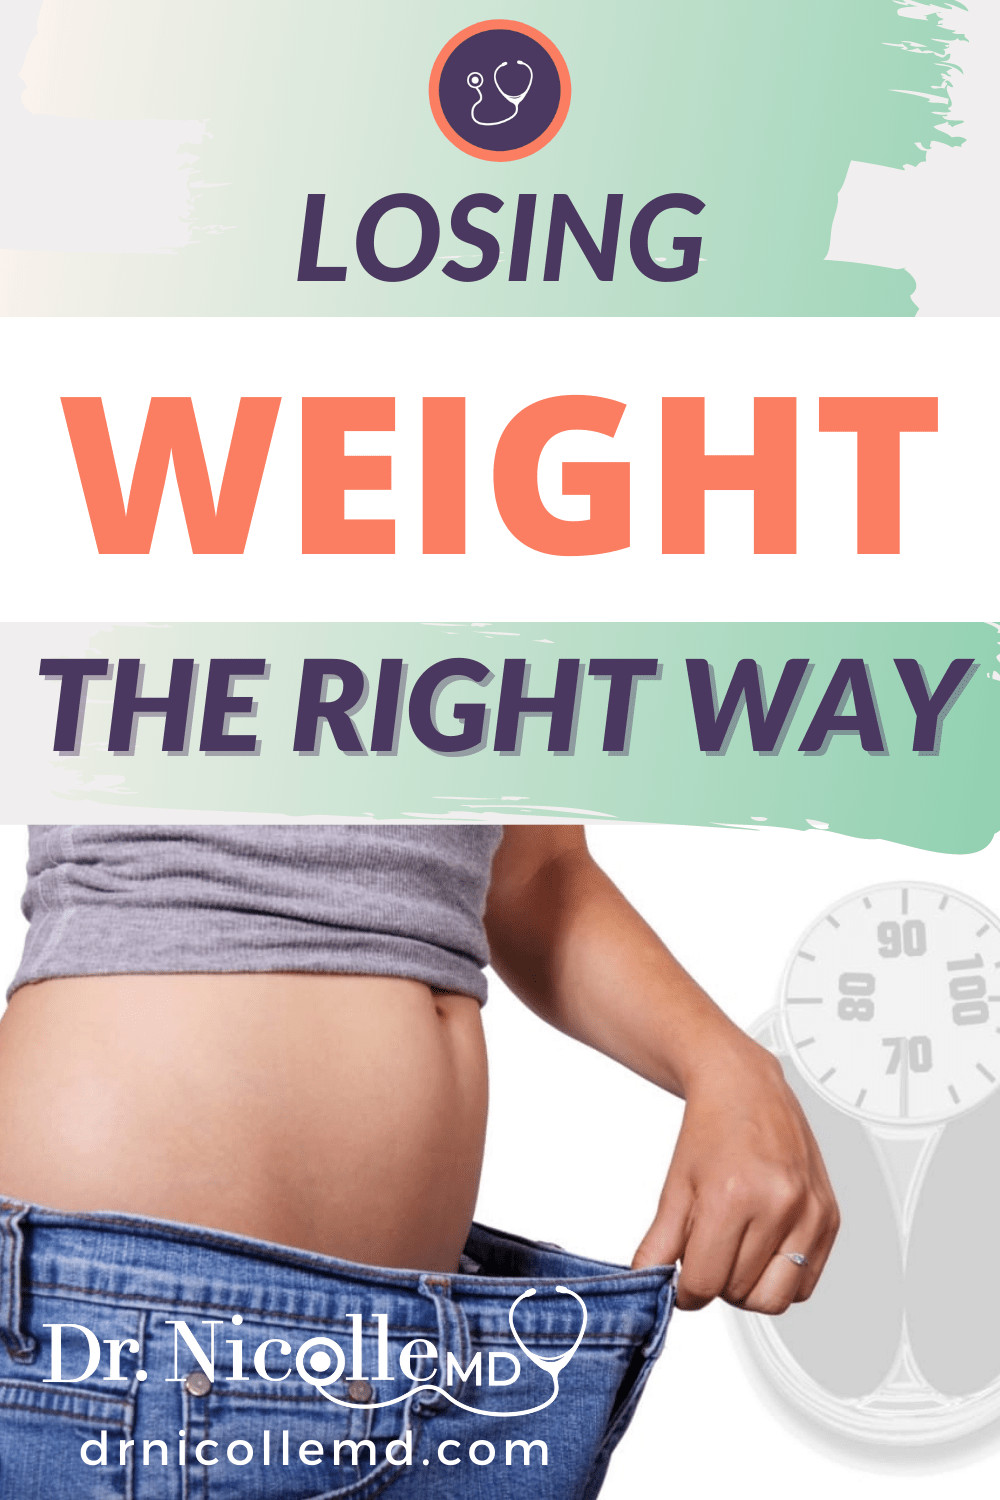 Losing Weight the Right Way